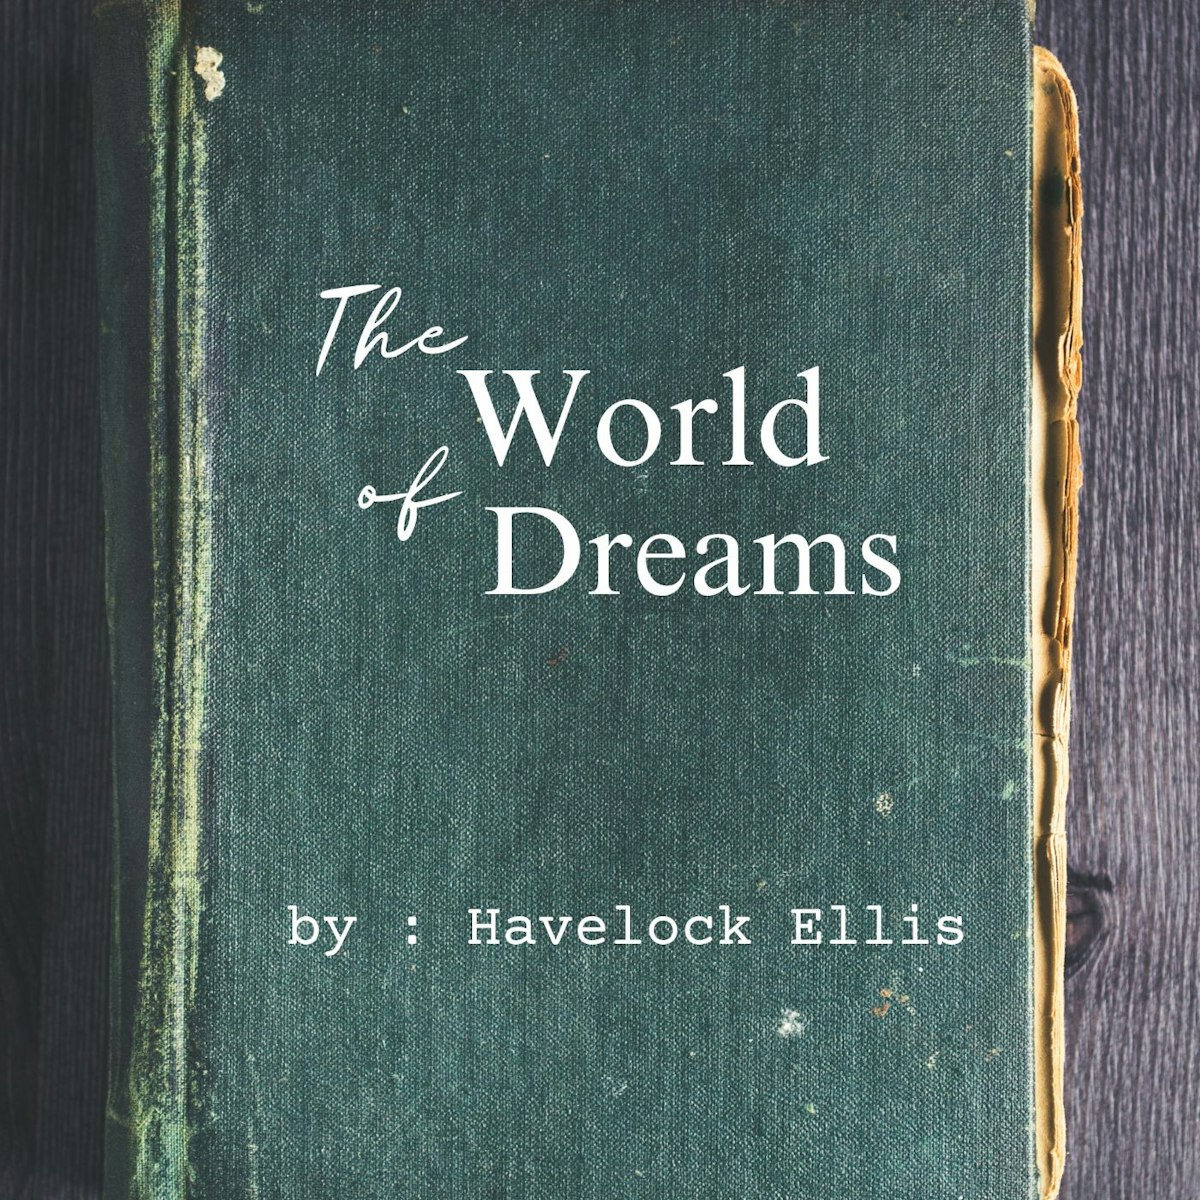 featured image - The World of Dreams by Havelock Ellis - Table of Links